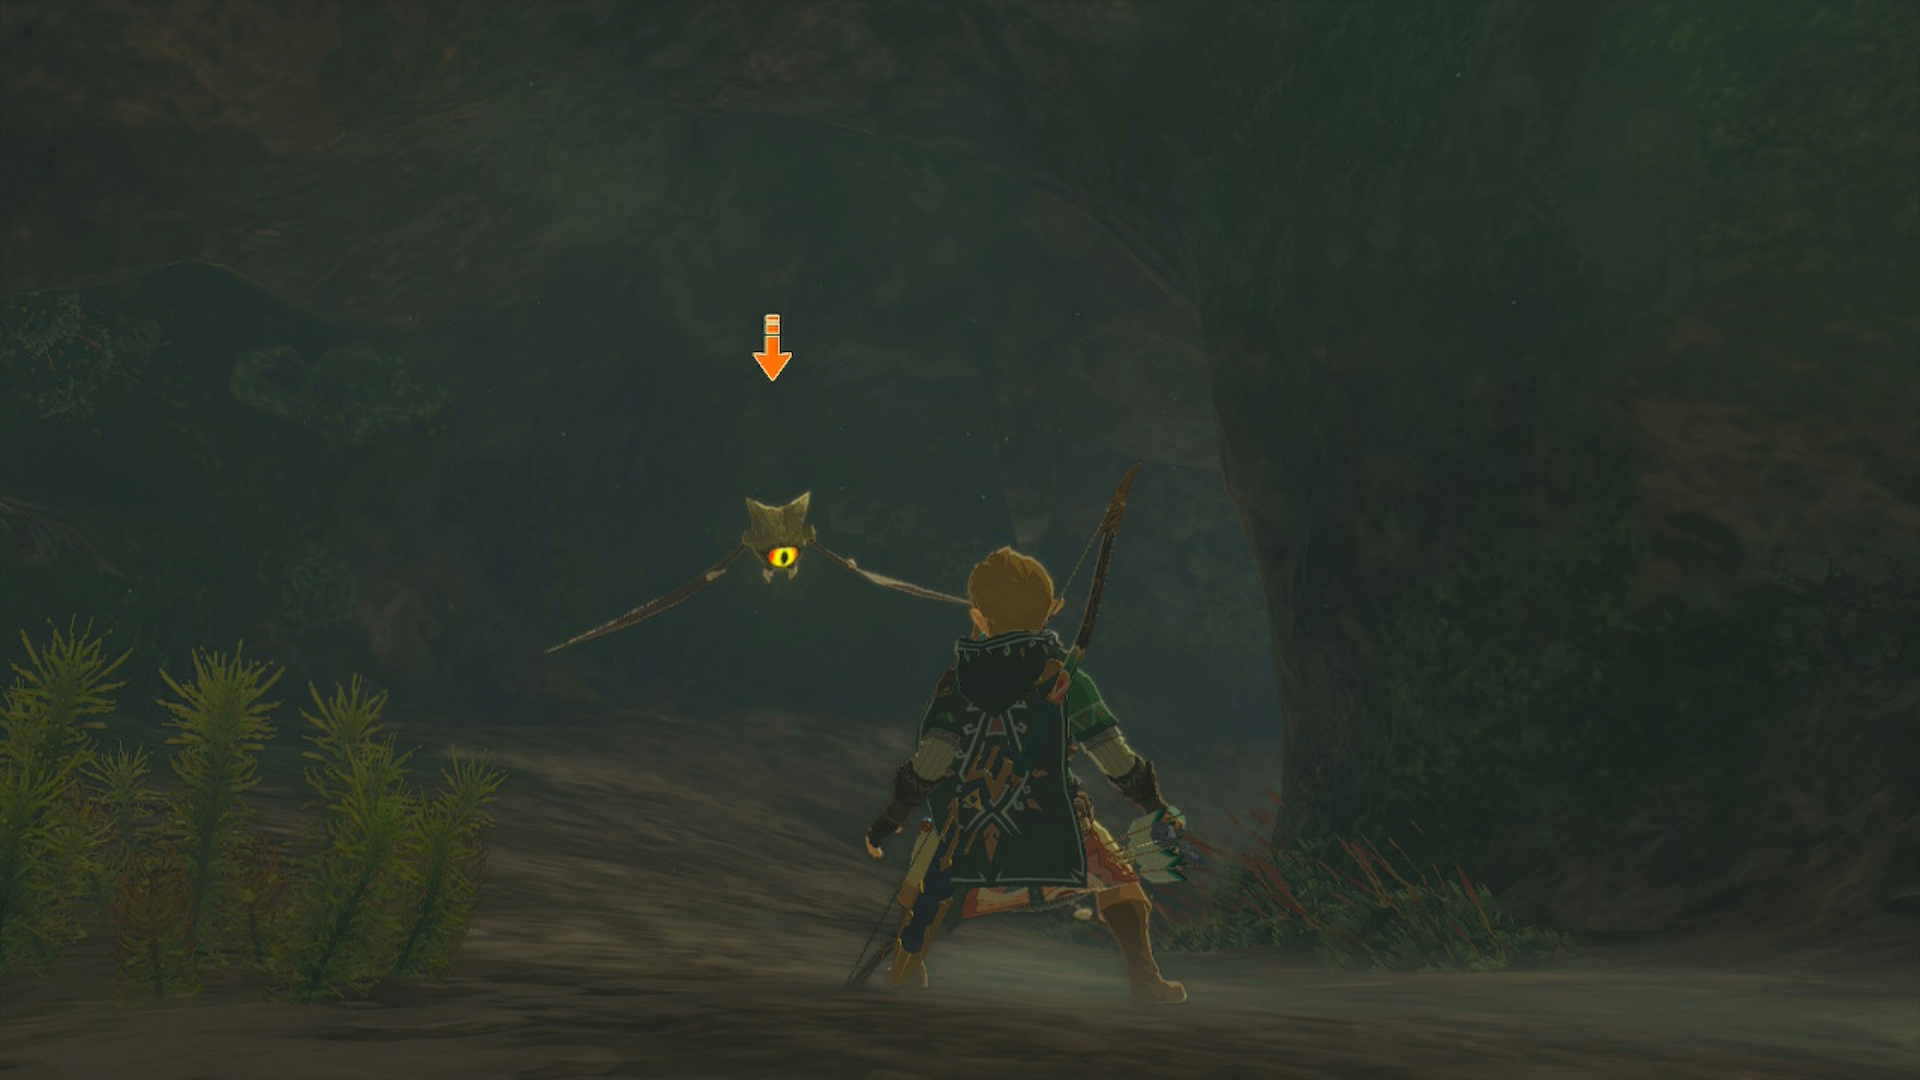 Hundreds of hours in… I found fishing spears : r/botw